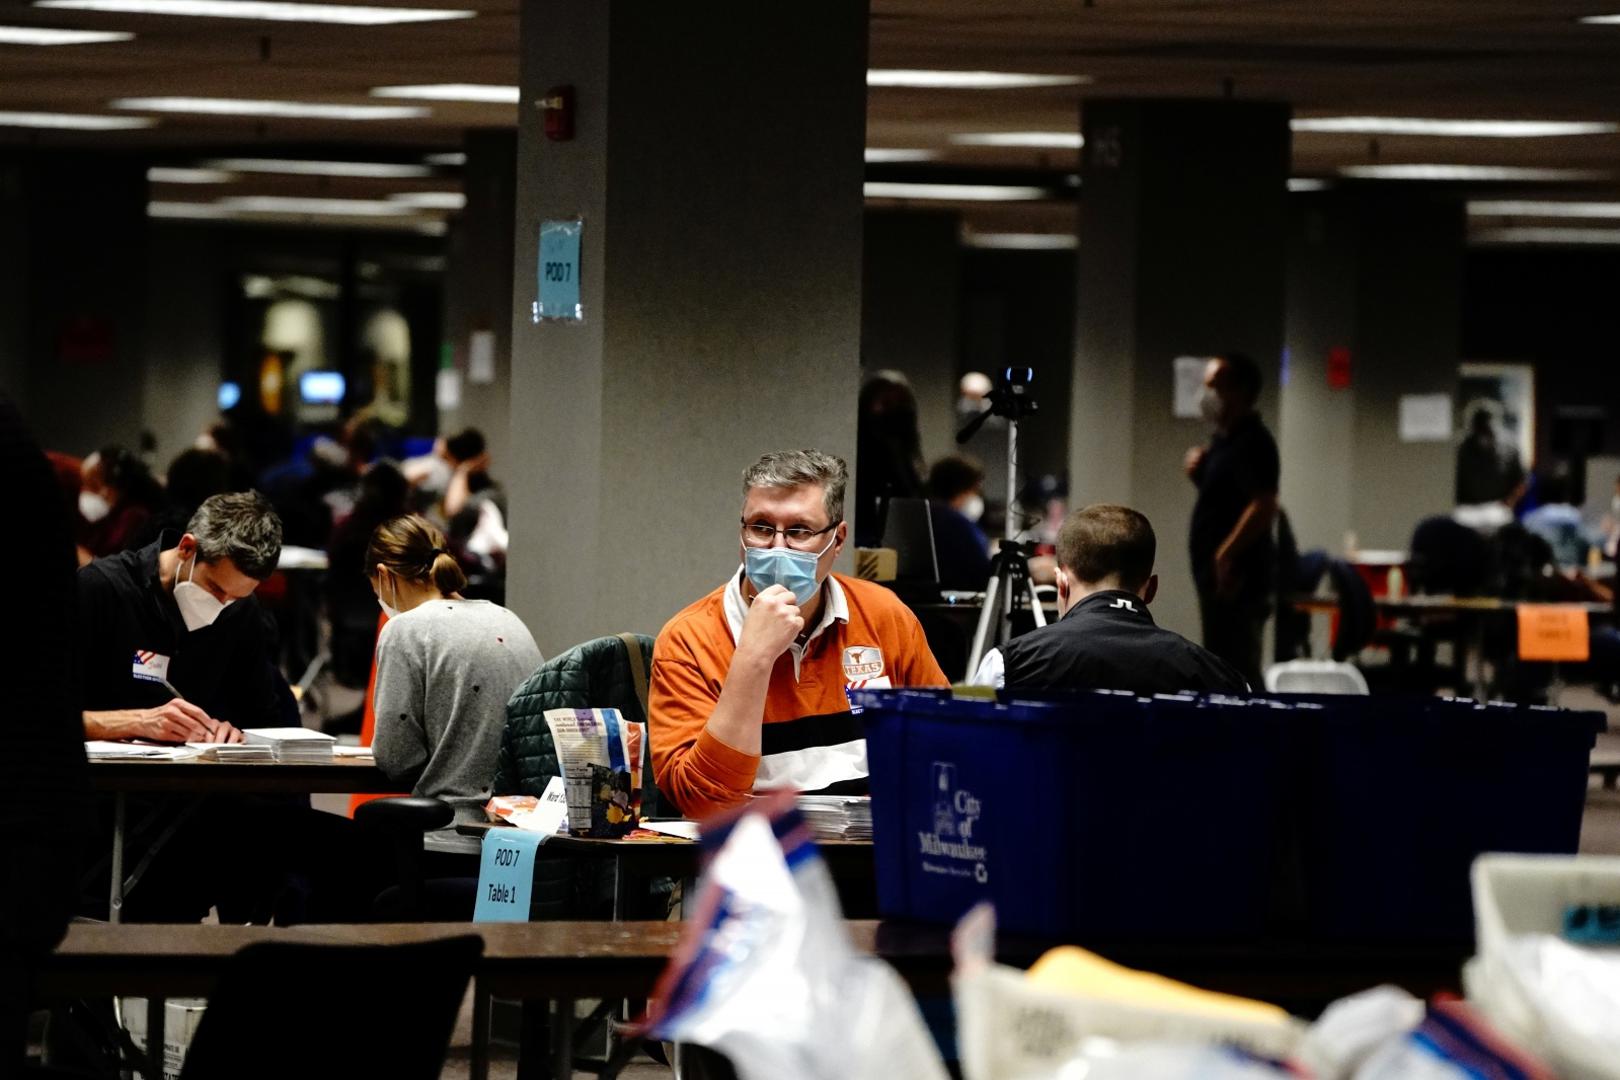 2020 U.S. presidential election in Wisconsin Poll workers process absentee ballots the night of Election Day at Milwaukee Central Count in Milwaukee, Wisconsin, U.S. November 3, 2020. REUTERS/Bing Guan BING GUAN